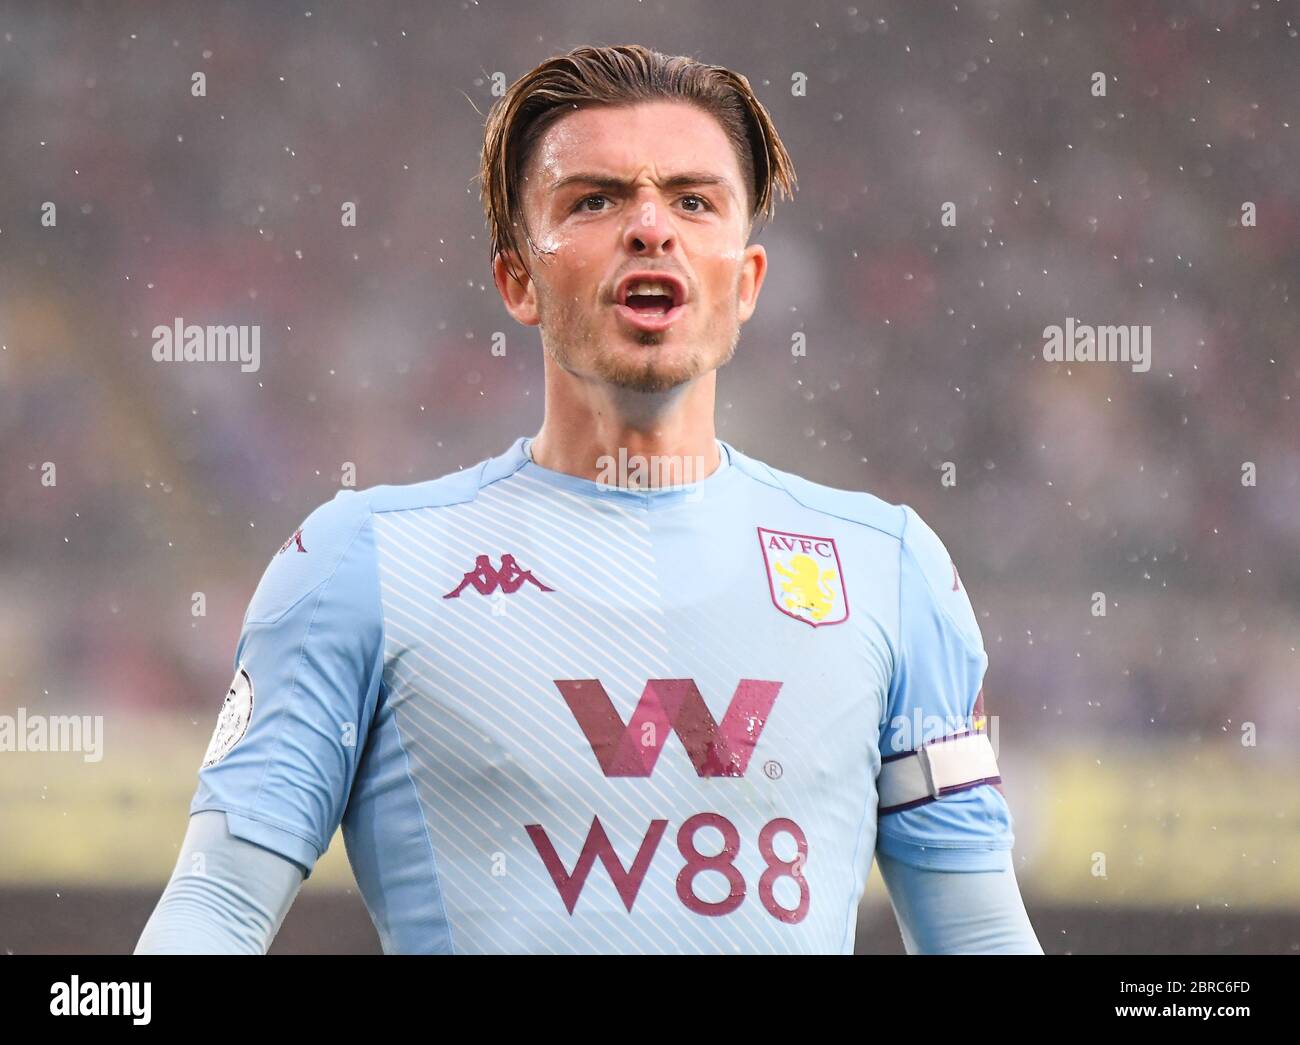 LONDON, ENGLAND - AUGUST 31, 2019: Jack Grealish of Villa pictured during the 2019/20 Premier League game between Crystal Palace FC and Aston Villa FC at Selhurst Park. Stock Photo